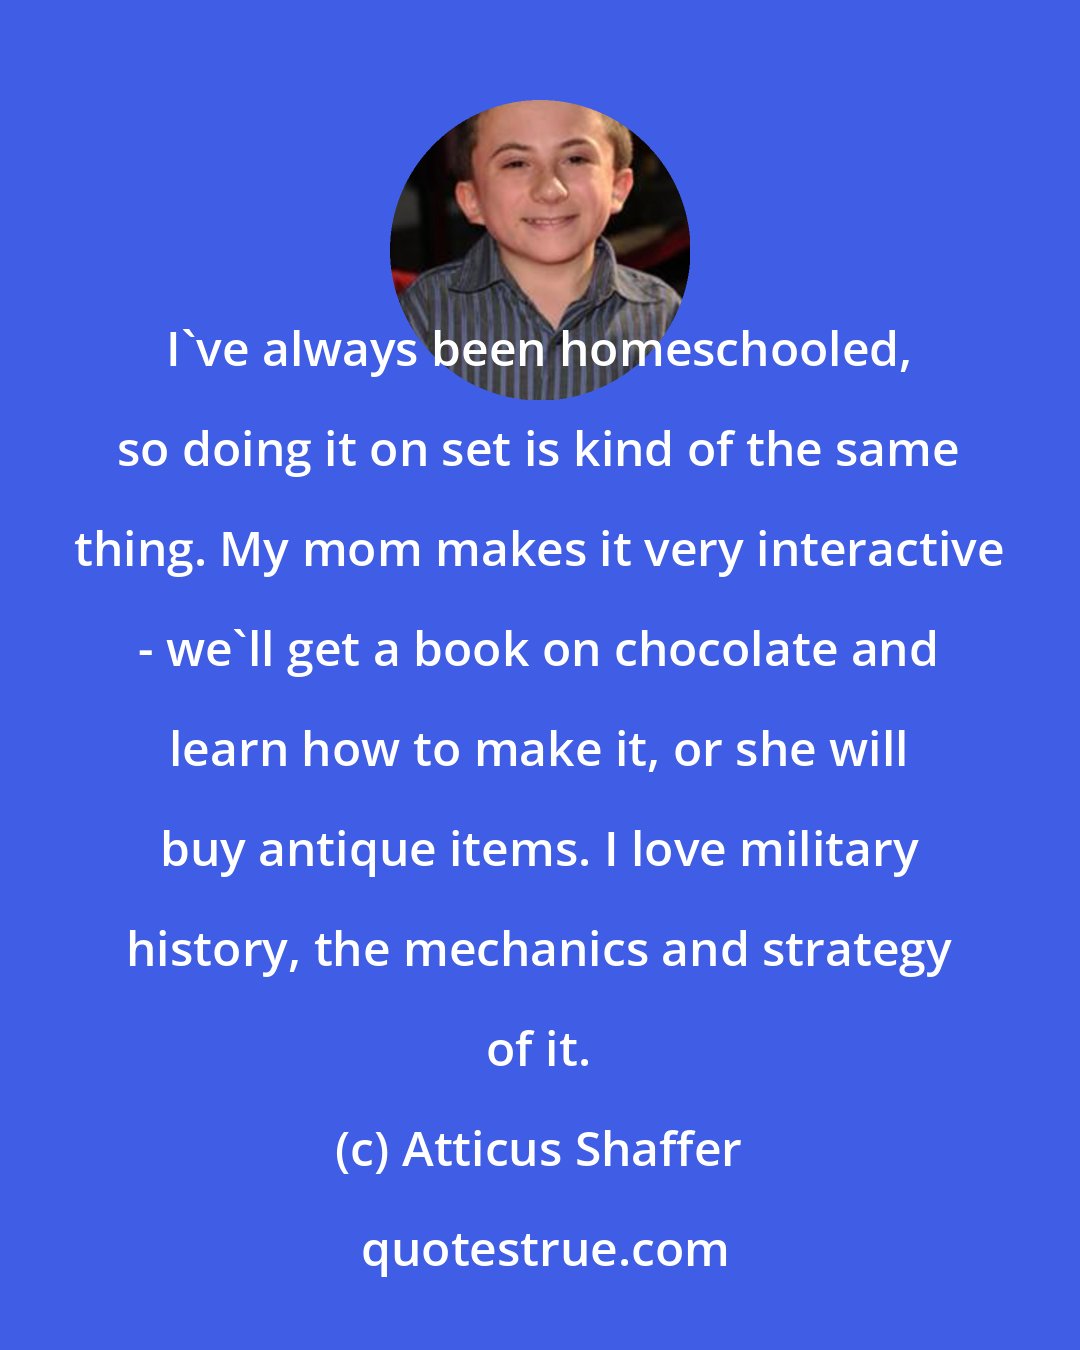 Atticus Shaffer: I've always been homeschooled, so doing it on set is kind of the same thing. My mom makes it very interactive - we'll get a book on chocolate and learn how to make it, or she will buy antique items. I love military history, the mechanics and strategy of it.